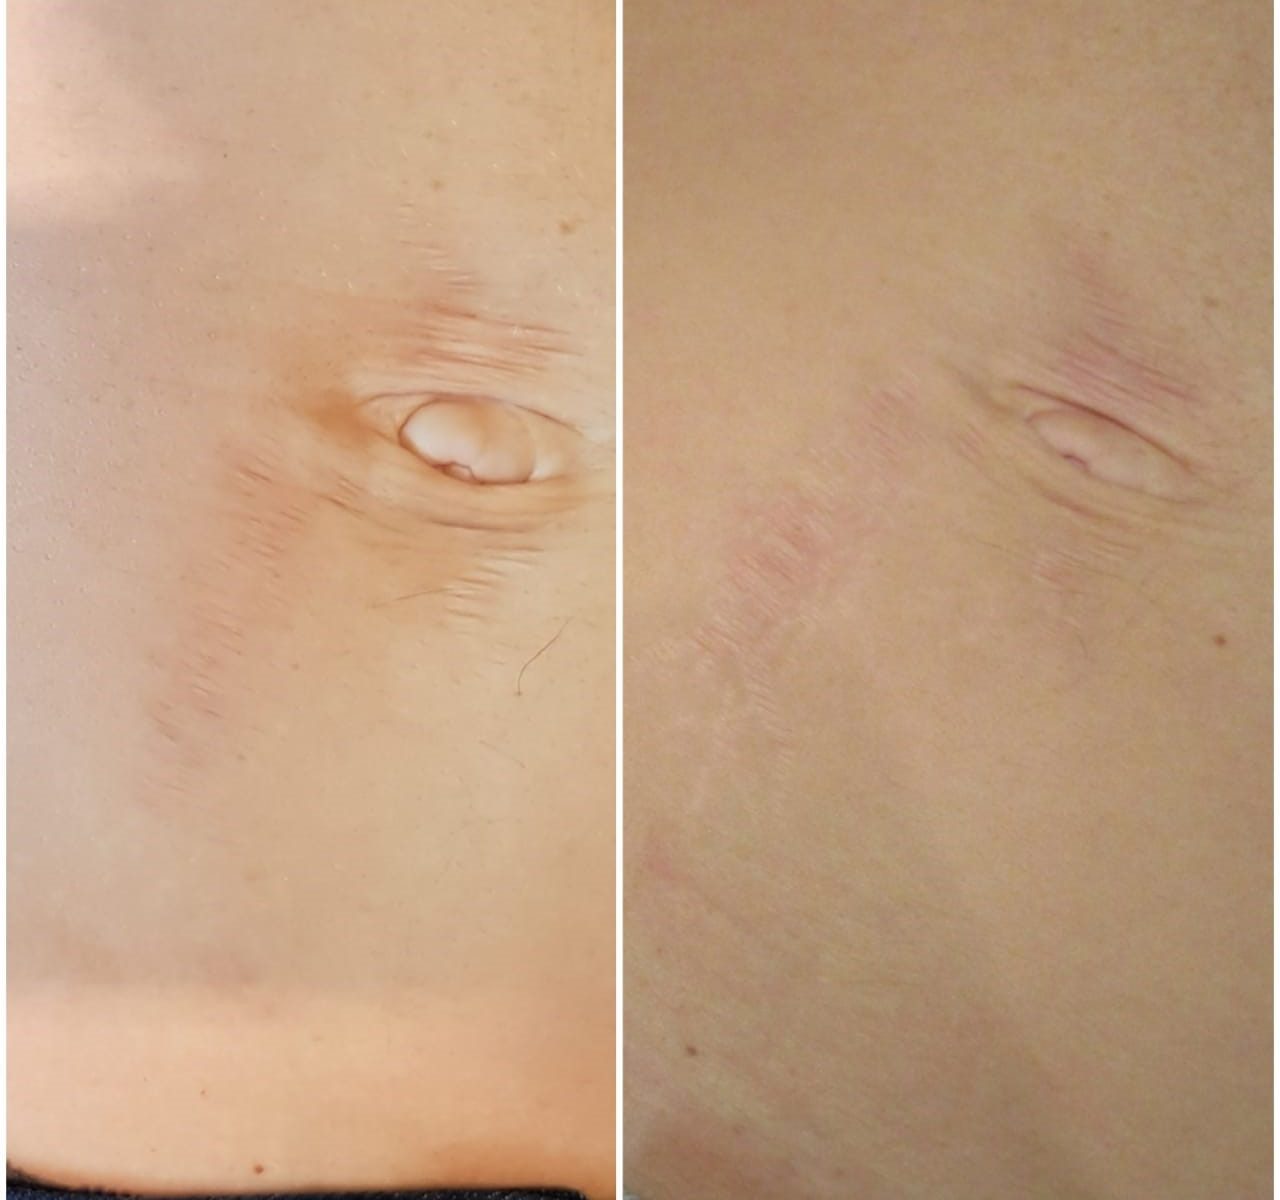 Stretchmarks before and after microneedling